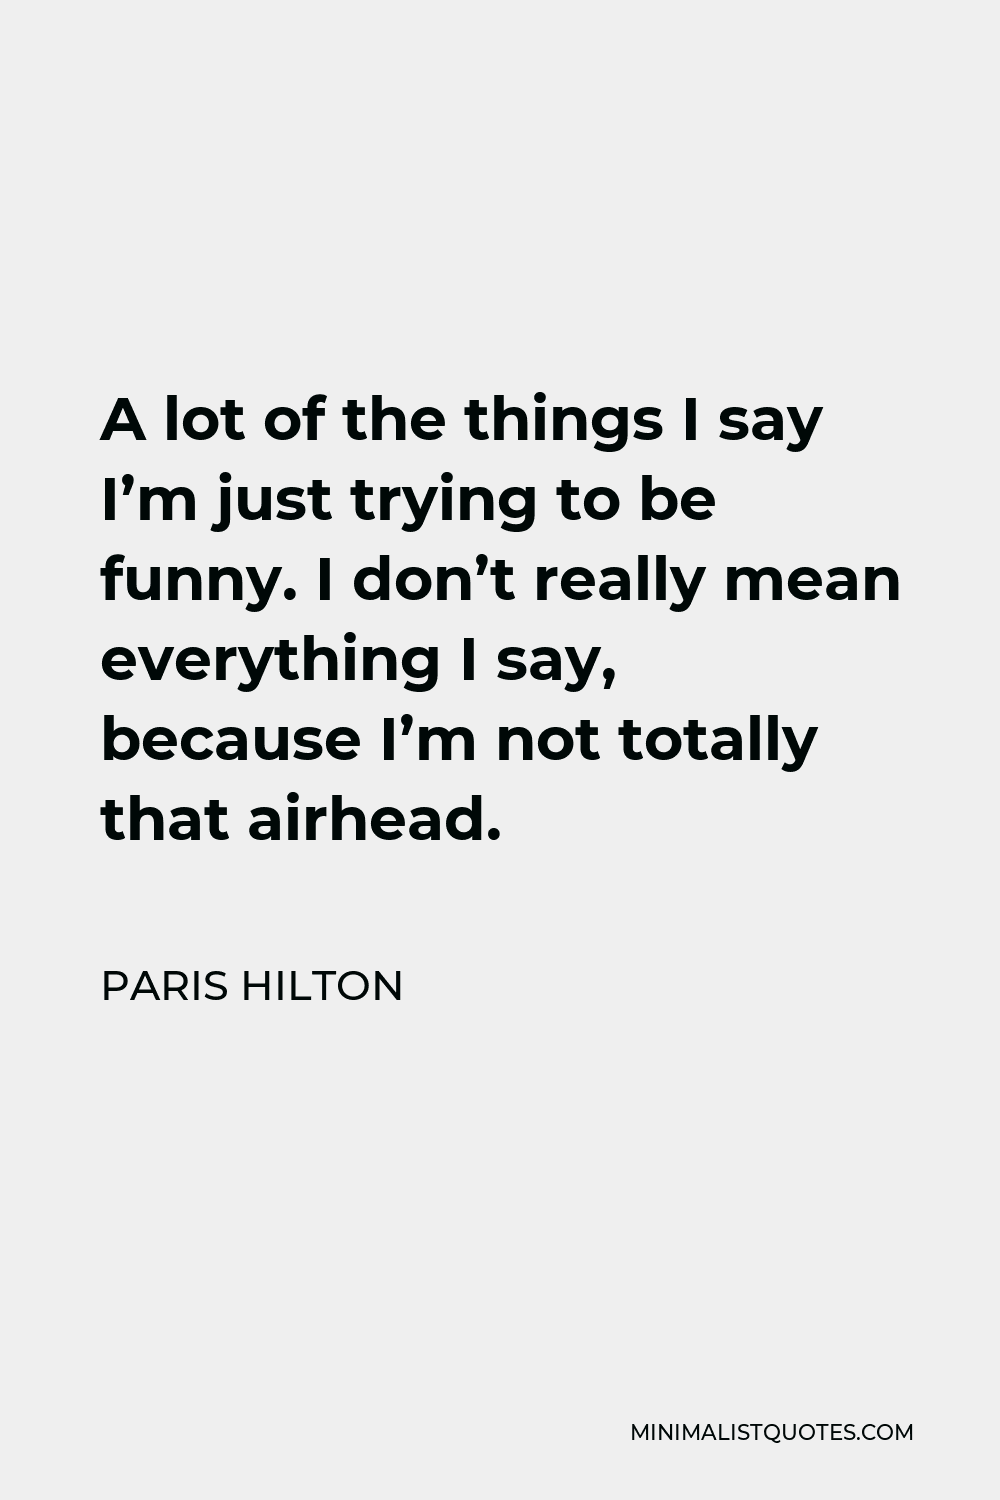 Paris Hilton Quote - A lot of the things I say I’m just trying to be funny. I don’t really mean everything I say, because I’m not totally that airhead.